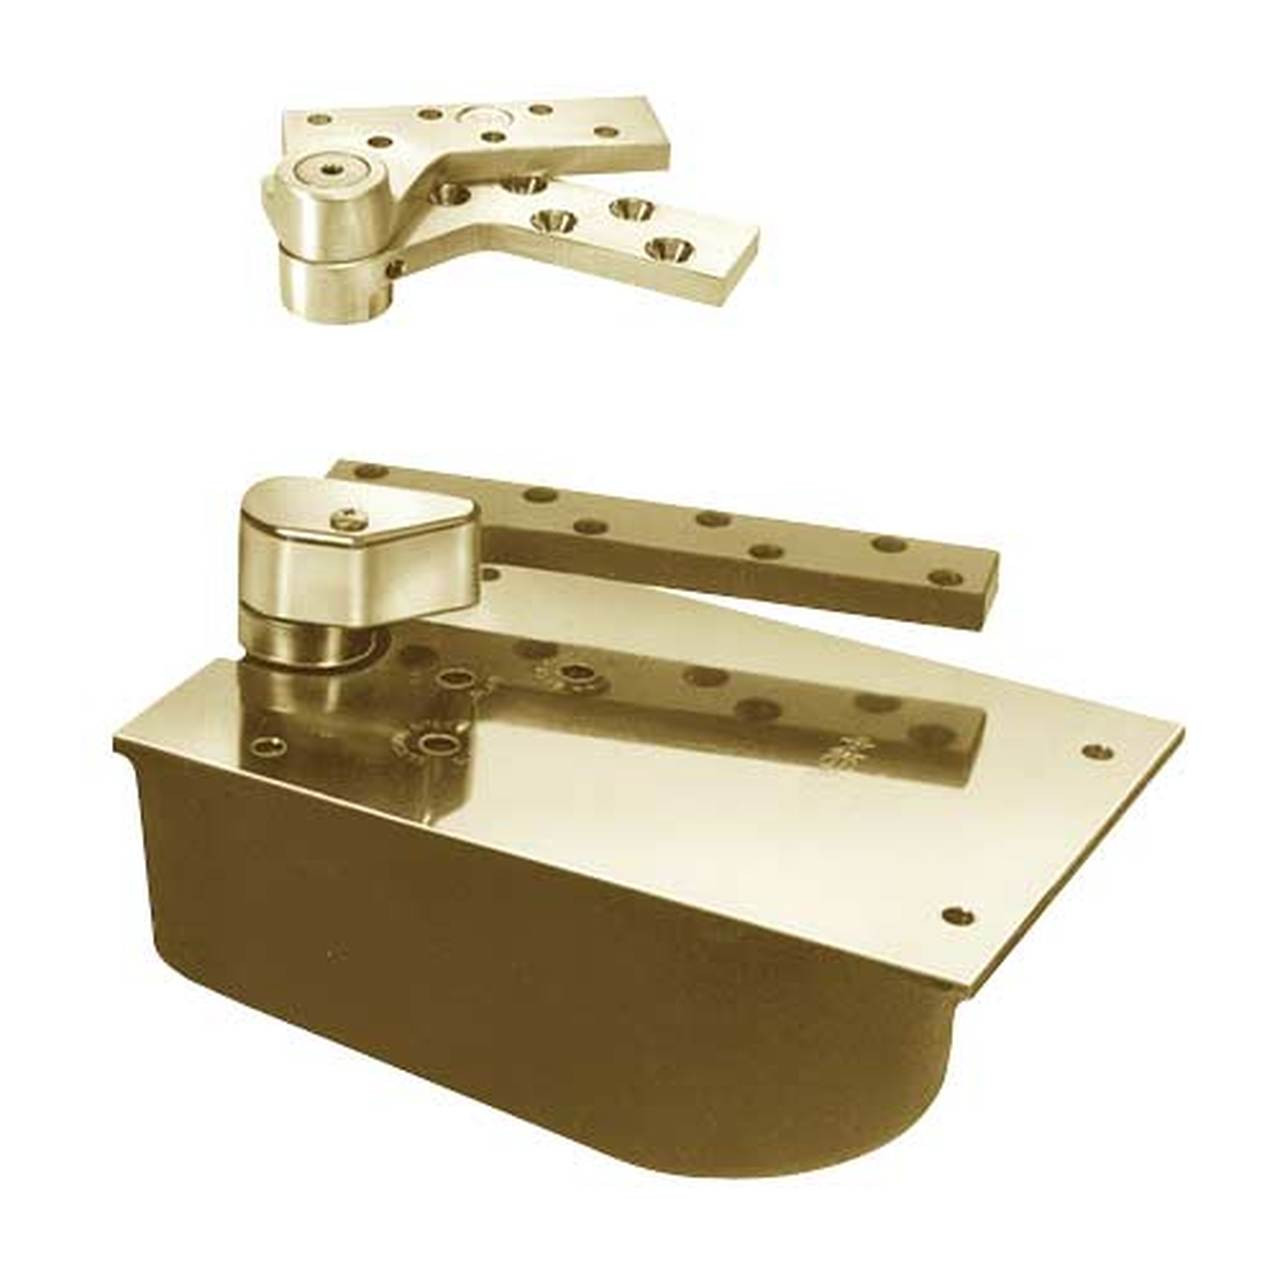 L27-95N-LFP-LCC-RH-2-1/2-606 Rixson 27 Series Extra Heavy Duty Lead Lined Offset Floor Closer in Satin Brass Finish